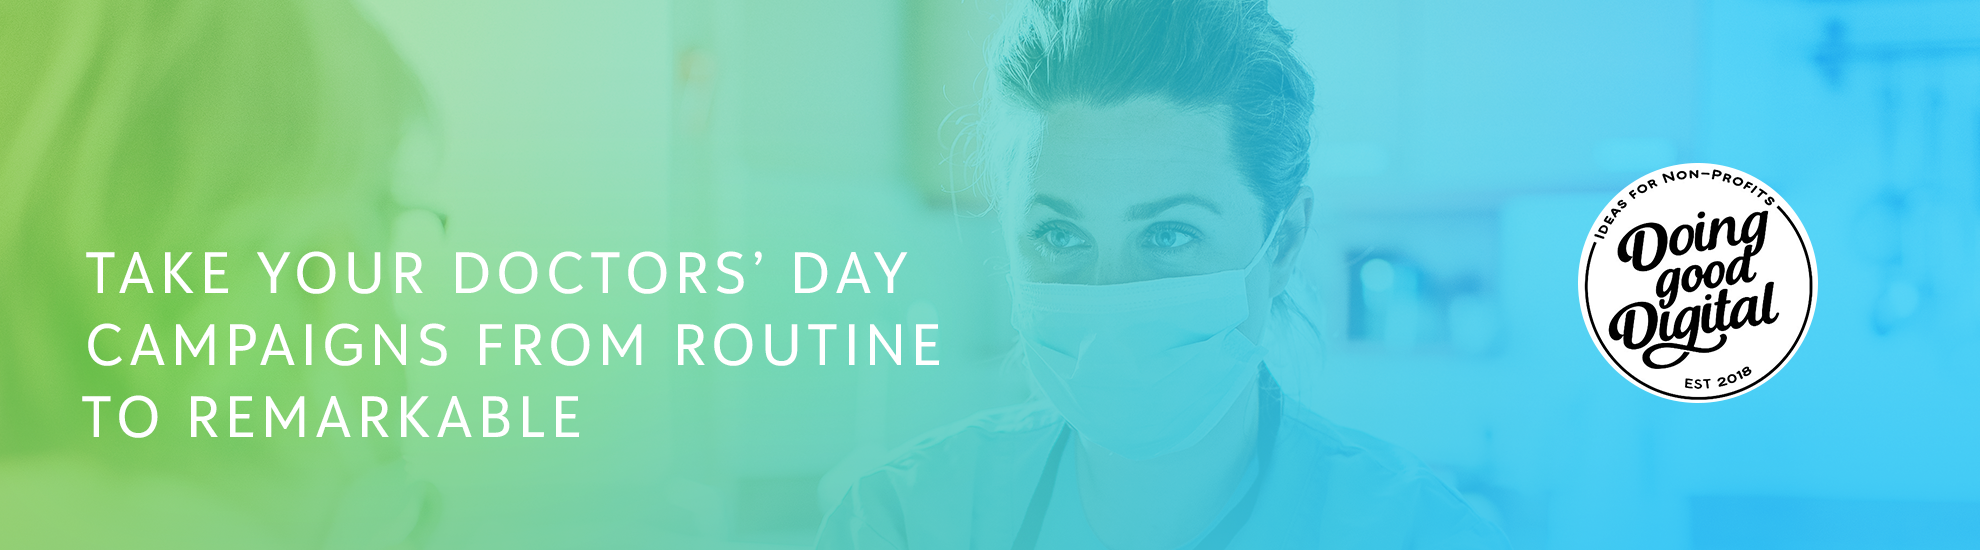 Take your Doctors' Day campaigns from routine to remarkable.